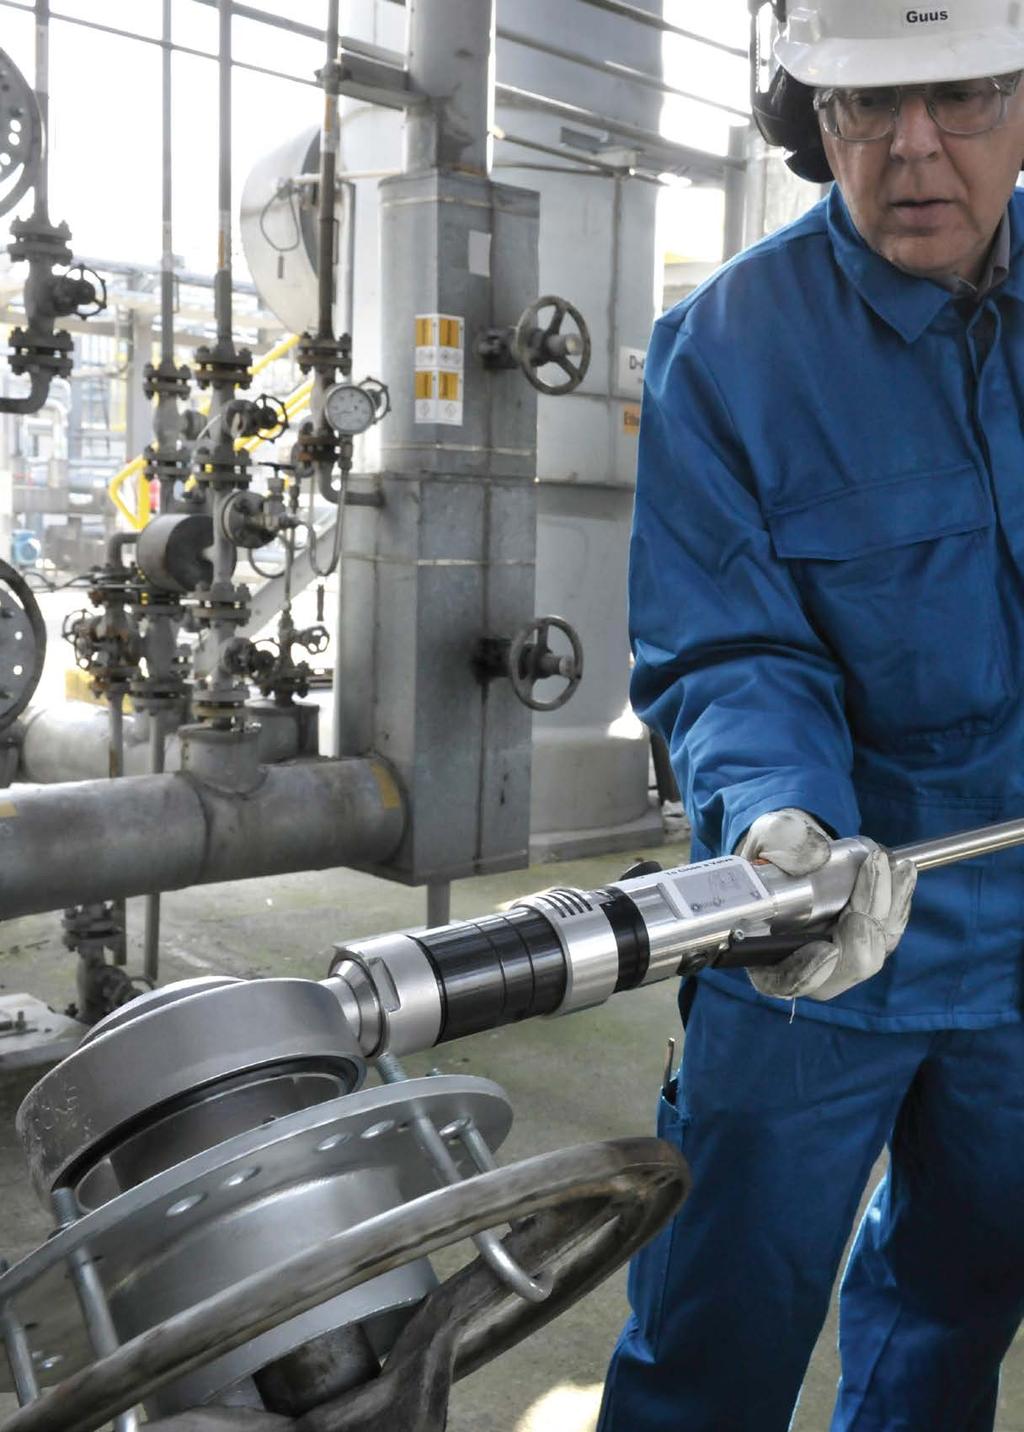 NETHERLOCKS is a premium supplier of industrial valve safety solutions. Our products help creating a safer working environment and are often regarded as an industry standard.